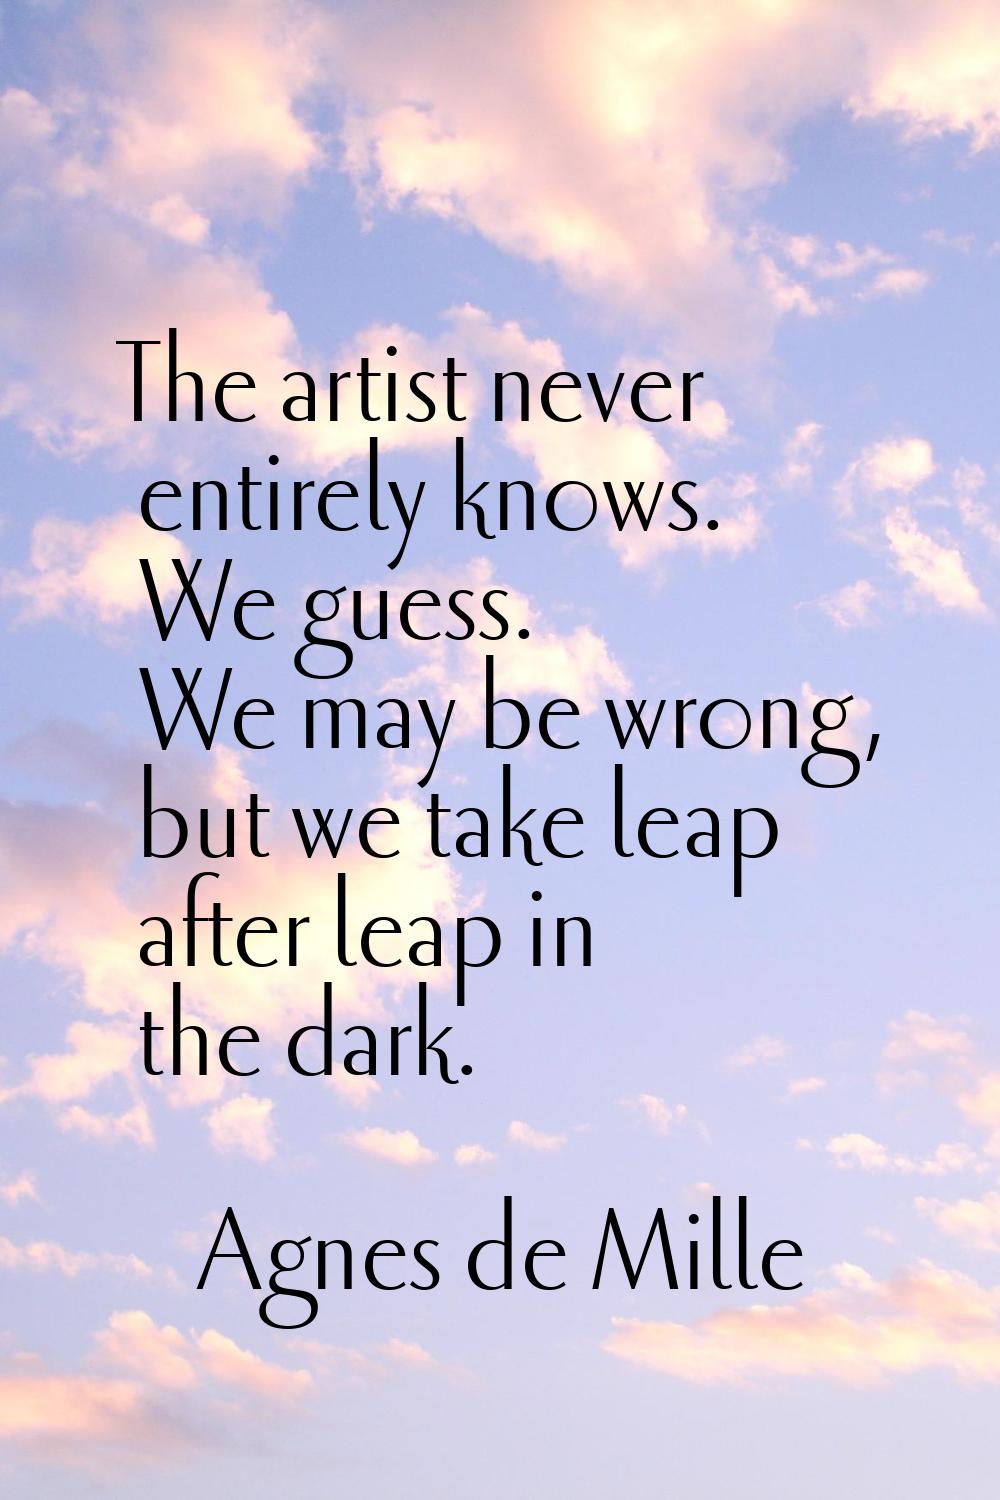 The artist never entirely knows. We guess. We may be wrong, but we take leap after leap in the dark